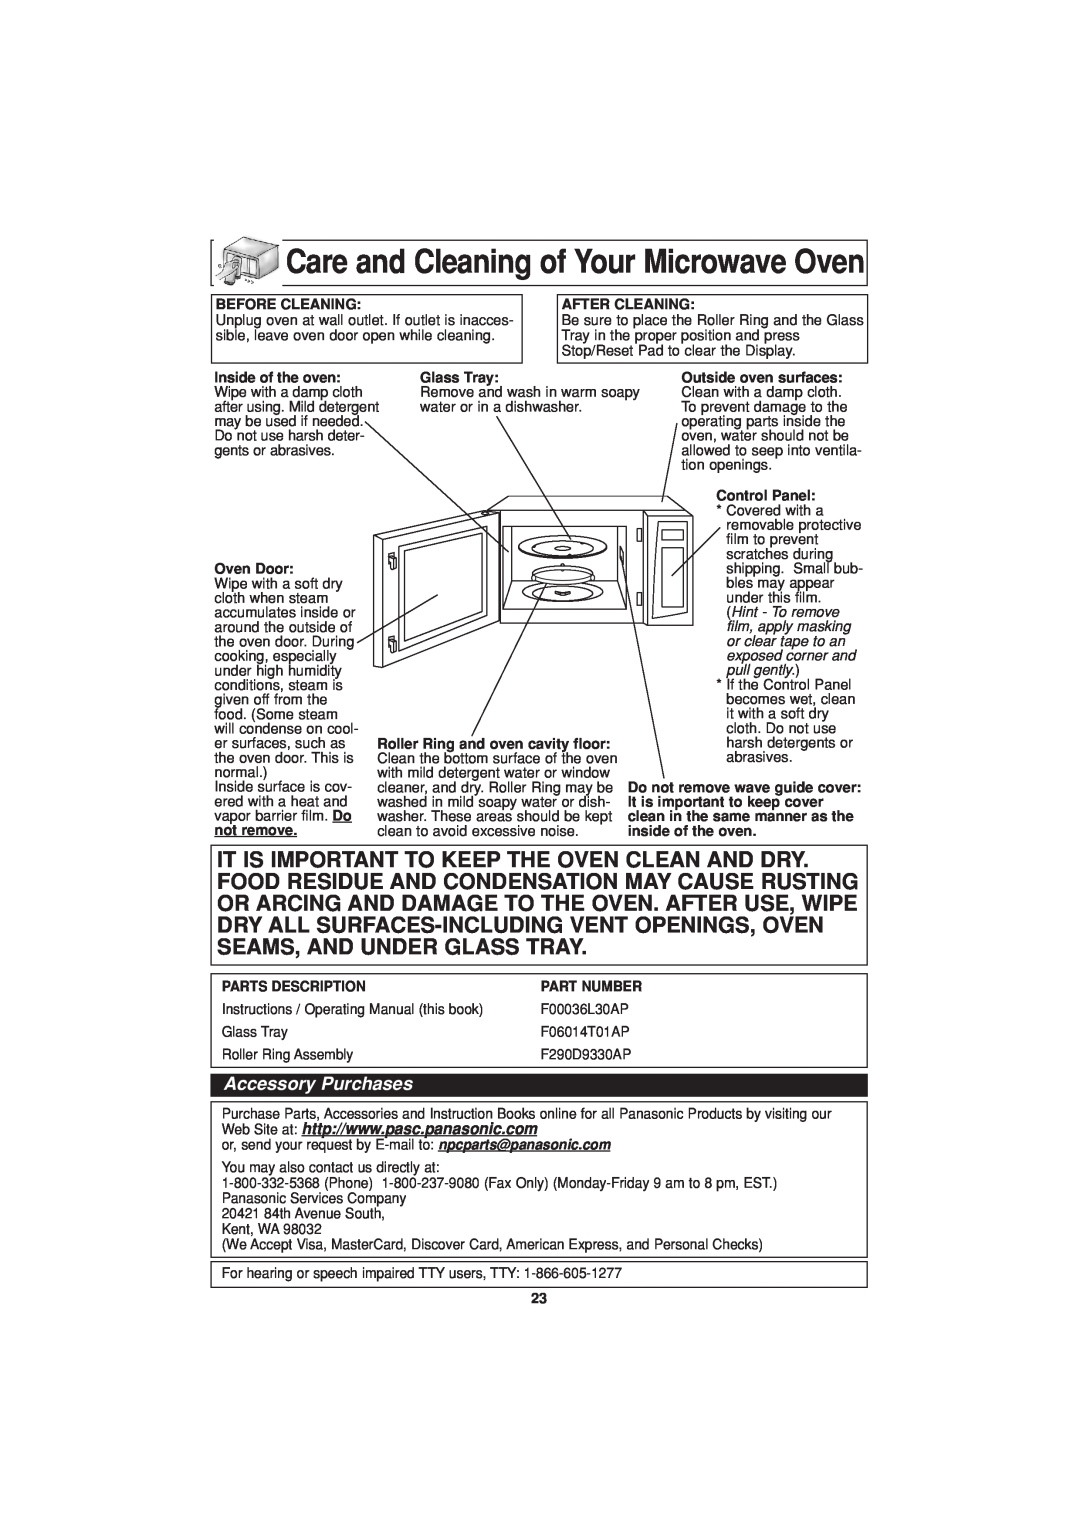 Panasonic NN-H624 operating instructions Care and Cleaning of Your Microwave Oven, Accessory Purchases 